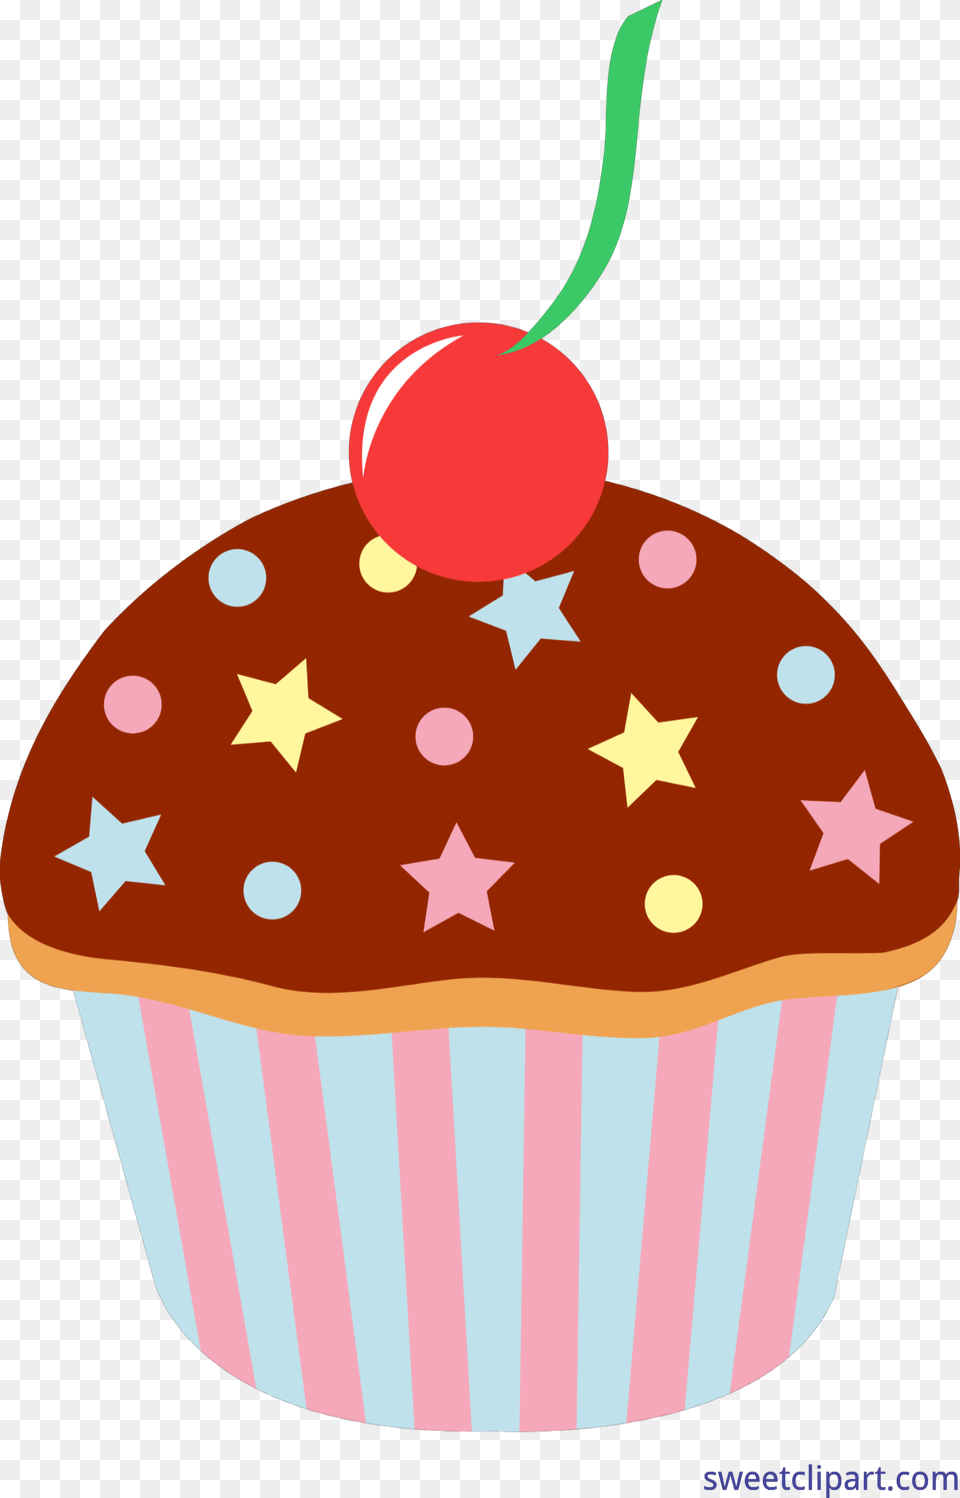 Vector Cupcakes Sprinkle Clipart Cartoon Cakes And Sweets, Cake, Cream, Cupcake, Dessert Free Transparent Png